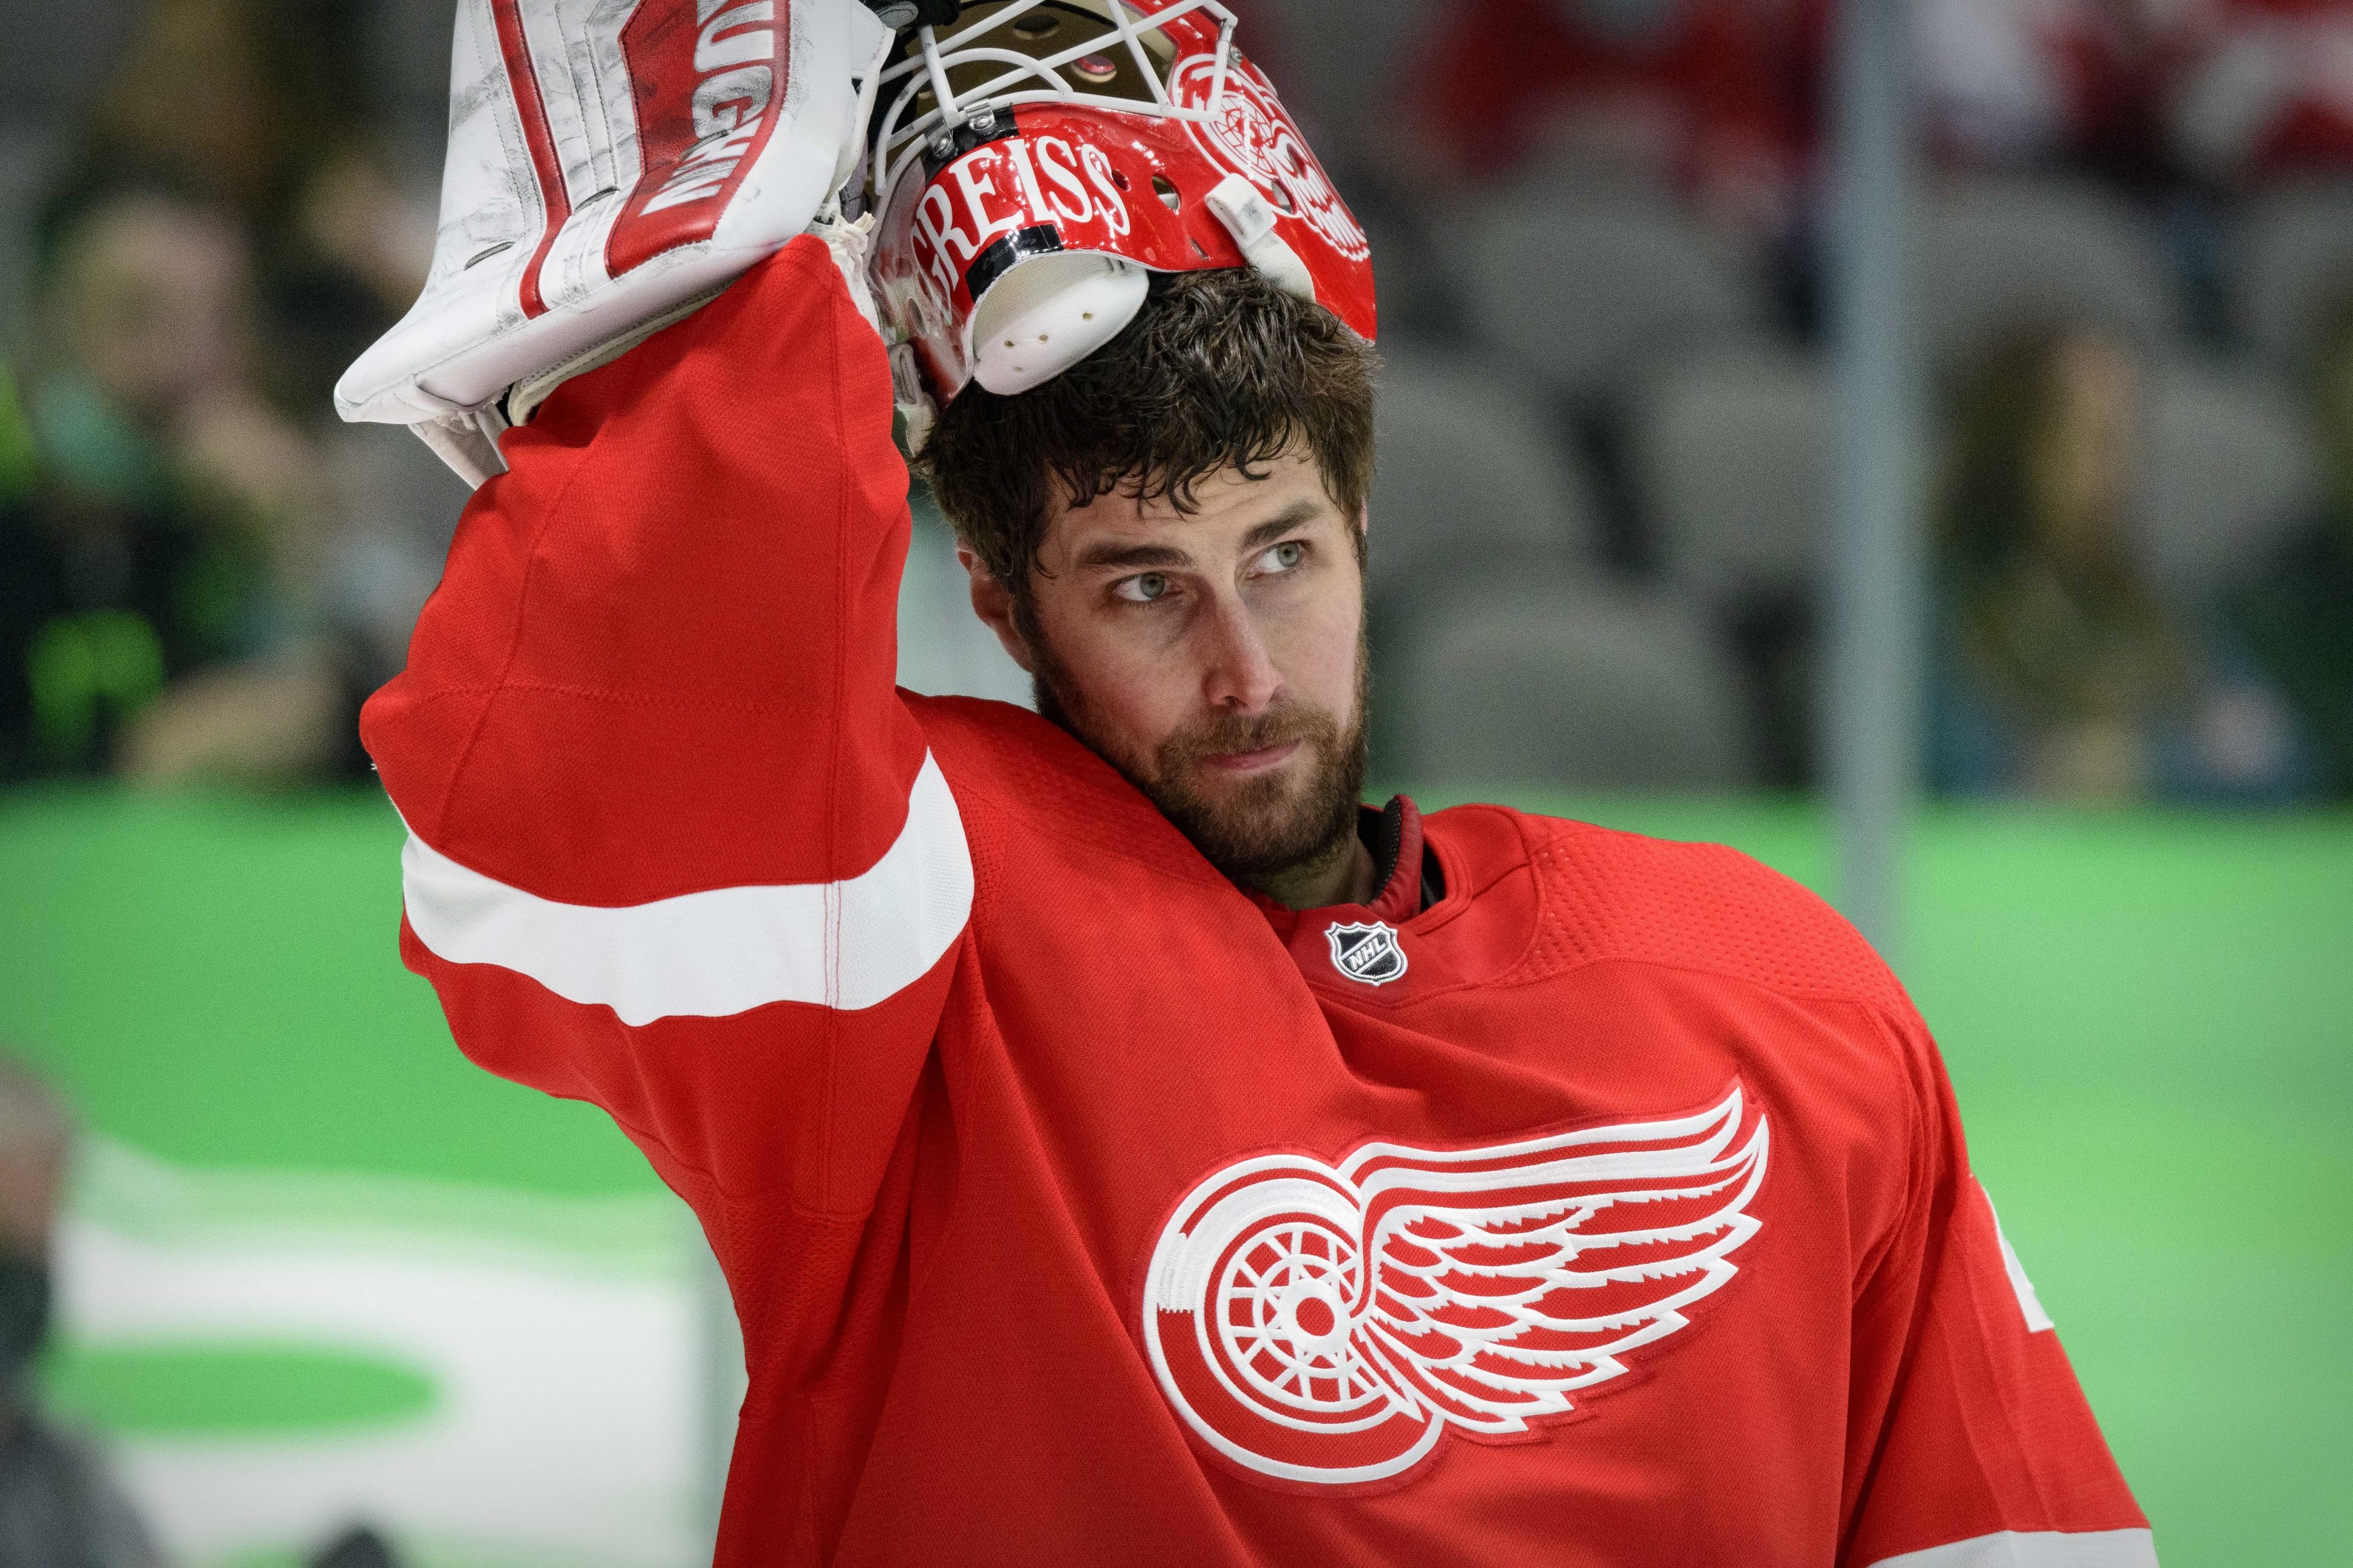 Detroit Red Wings 2021-22 goaltending tandem is something to watch